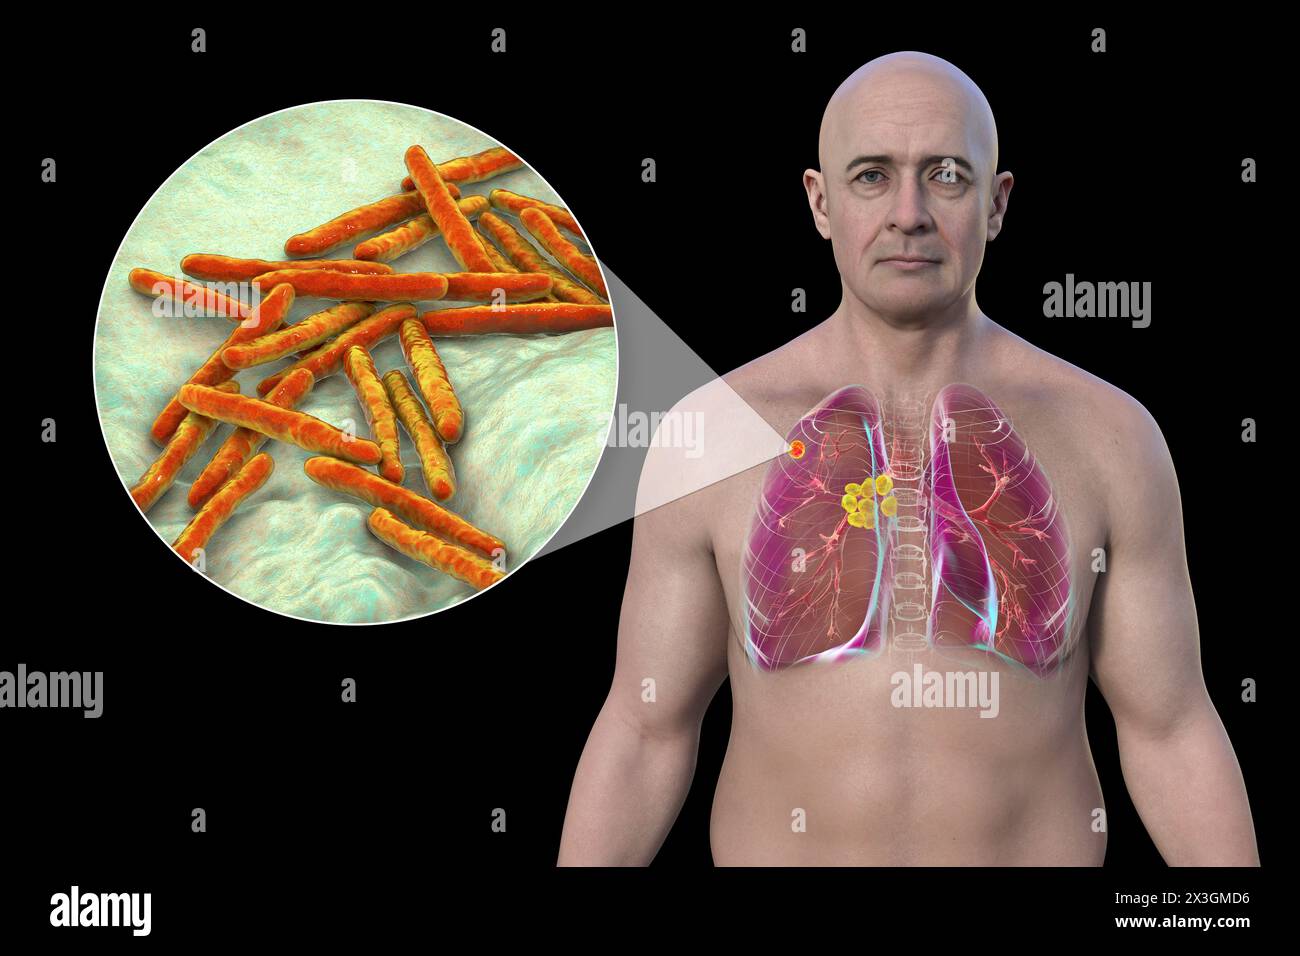 Illustration of a man with primary lung tuberculosis, revealing the Ghon complex and mediastinal lymphadenitis and a close-up view of Mycobacterium tuberculosis bacteria. Stock Photo